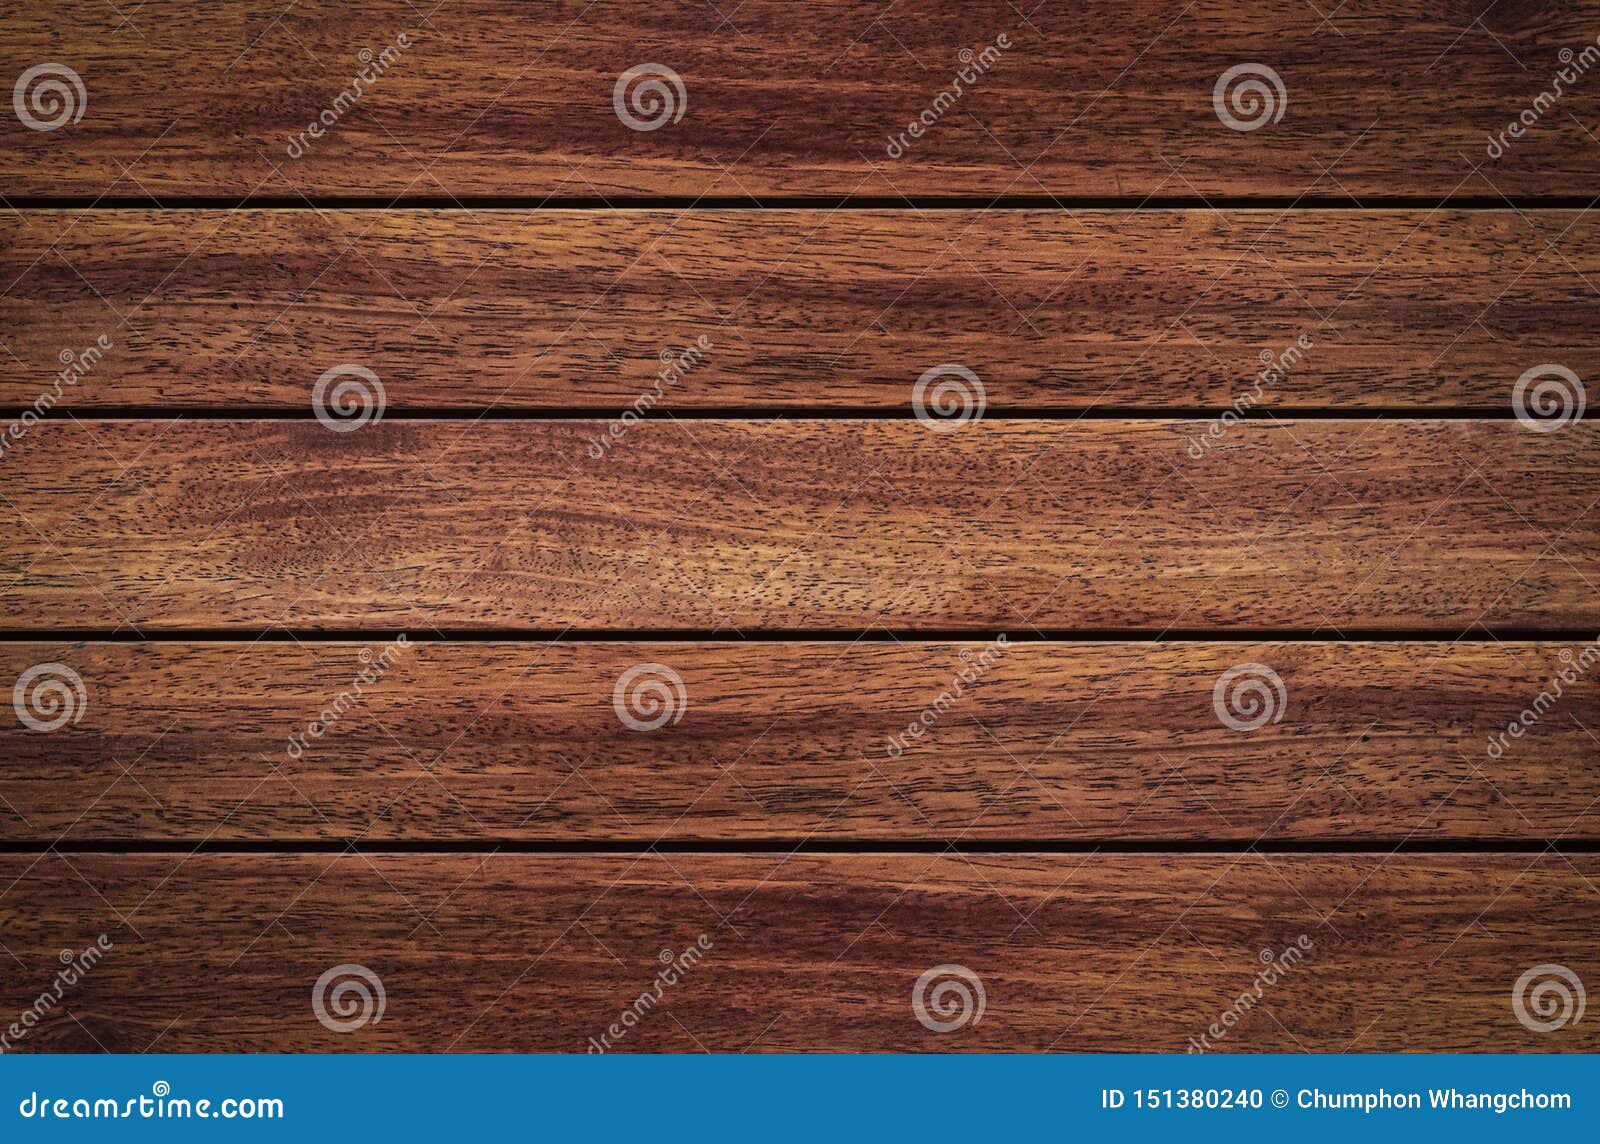 old wood plank texture background. wooden board surface or vintage backdrops